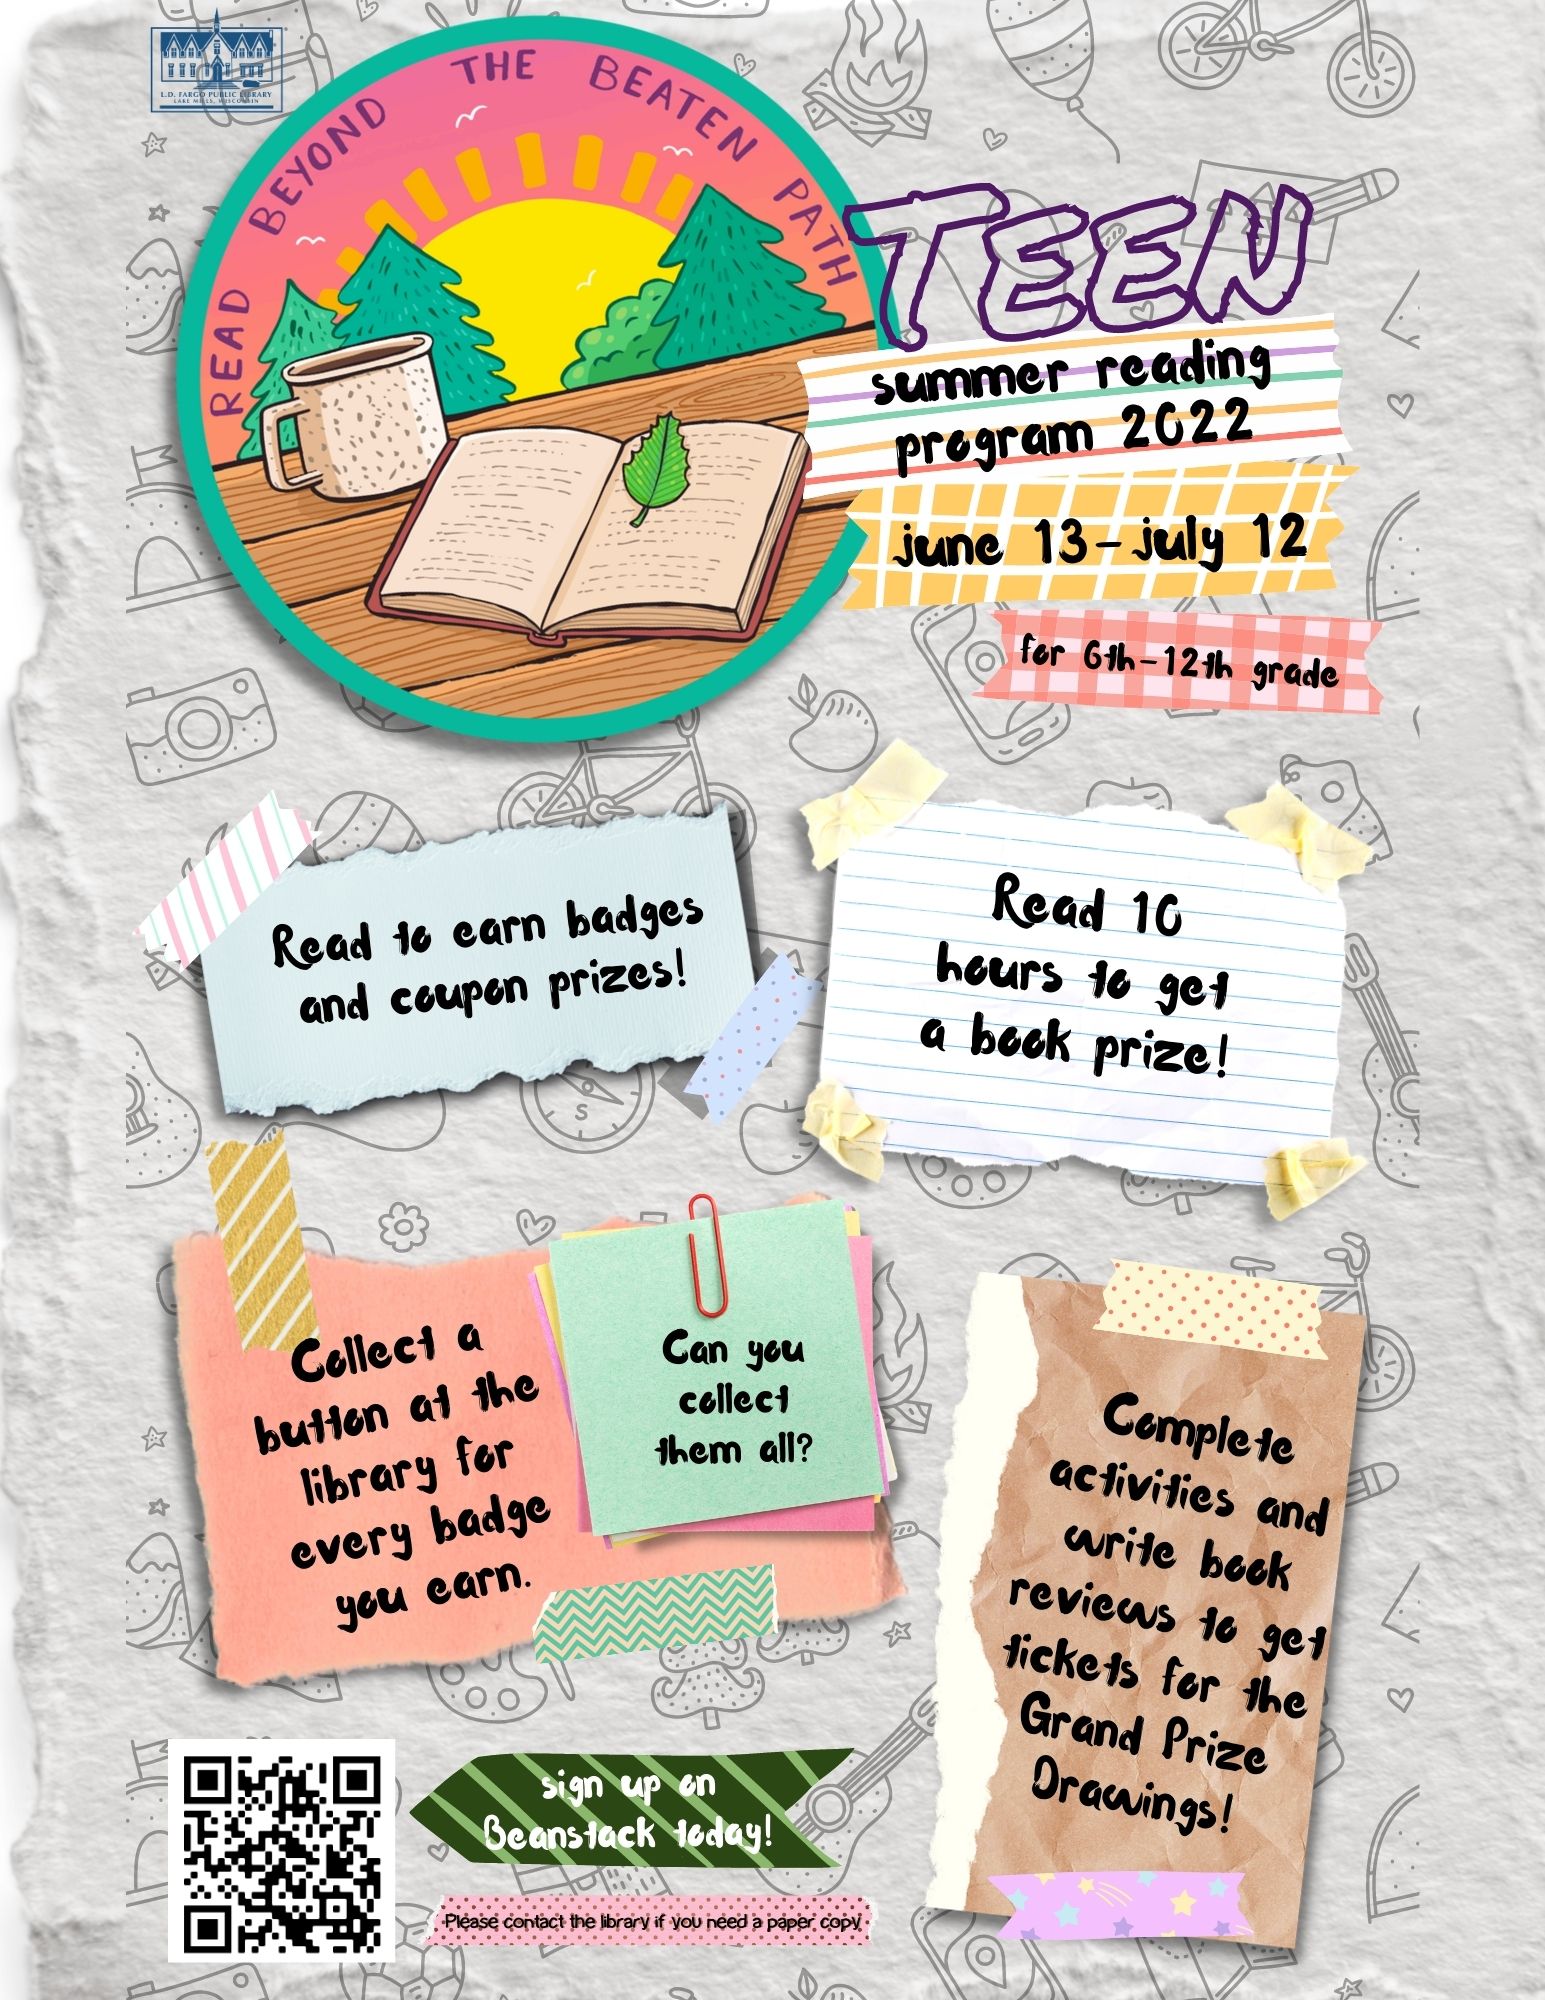 Summer Reading Program. Sign up begins May 23.  June 13-July 22. Grades 6-12.  Read to earn badges, buttons, and coupon prizes.  Read 10 hours to get a book prize!